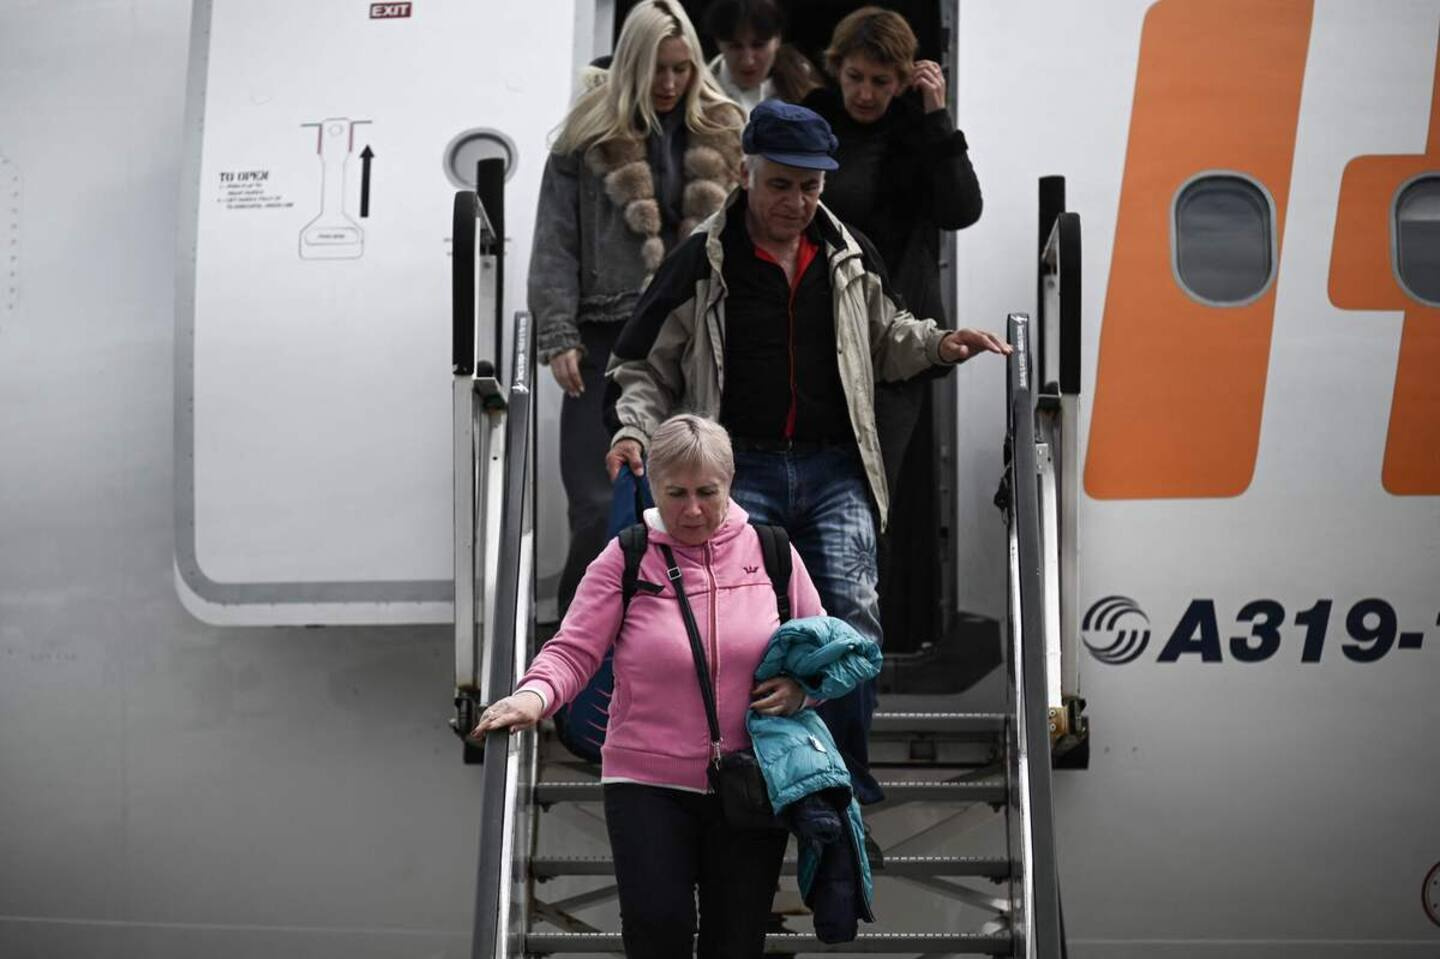 War in Ukraine: a charter flight of refugees expected in Montreal